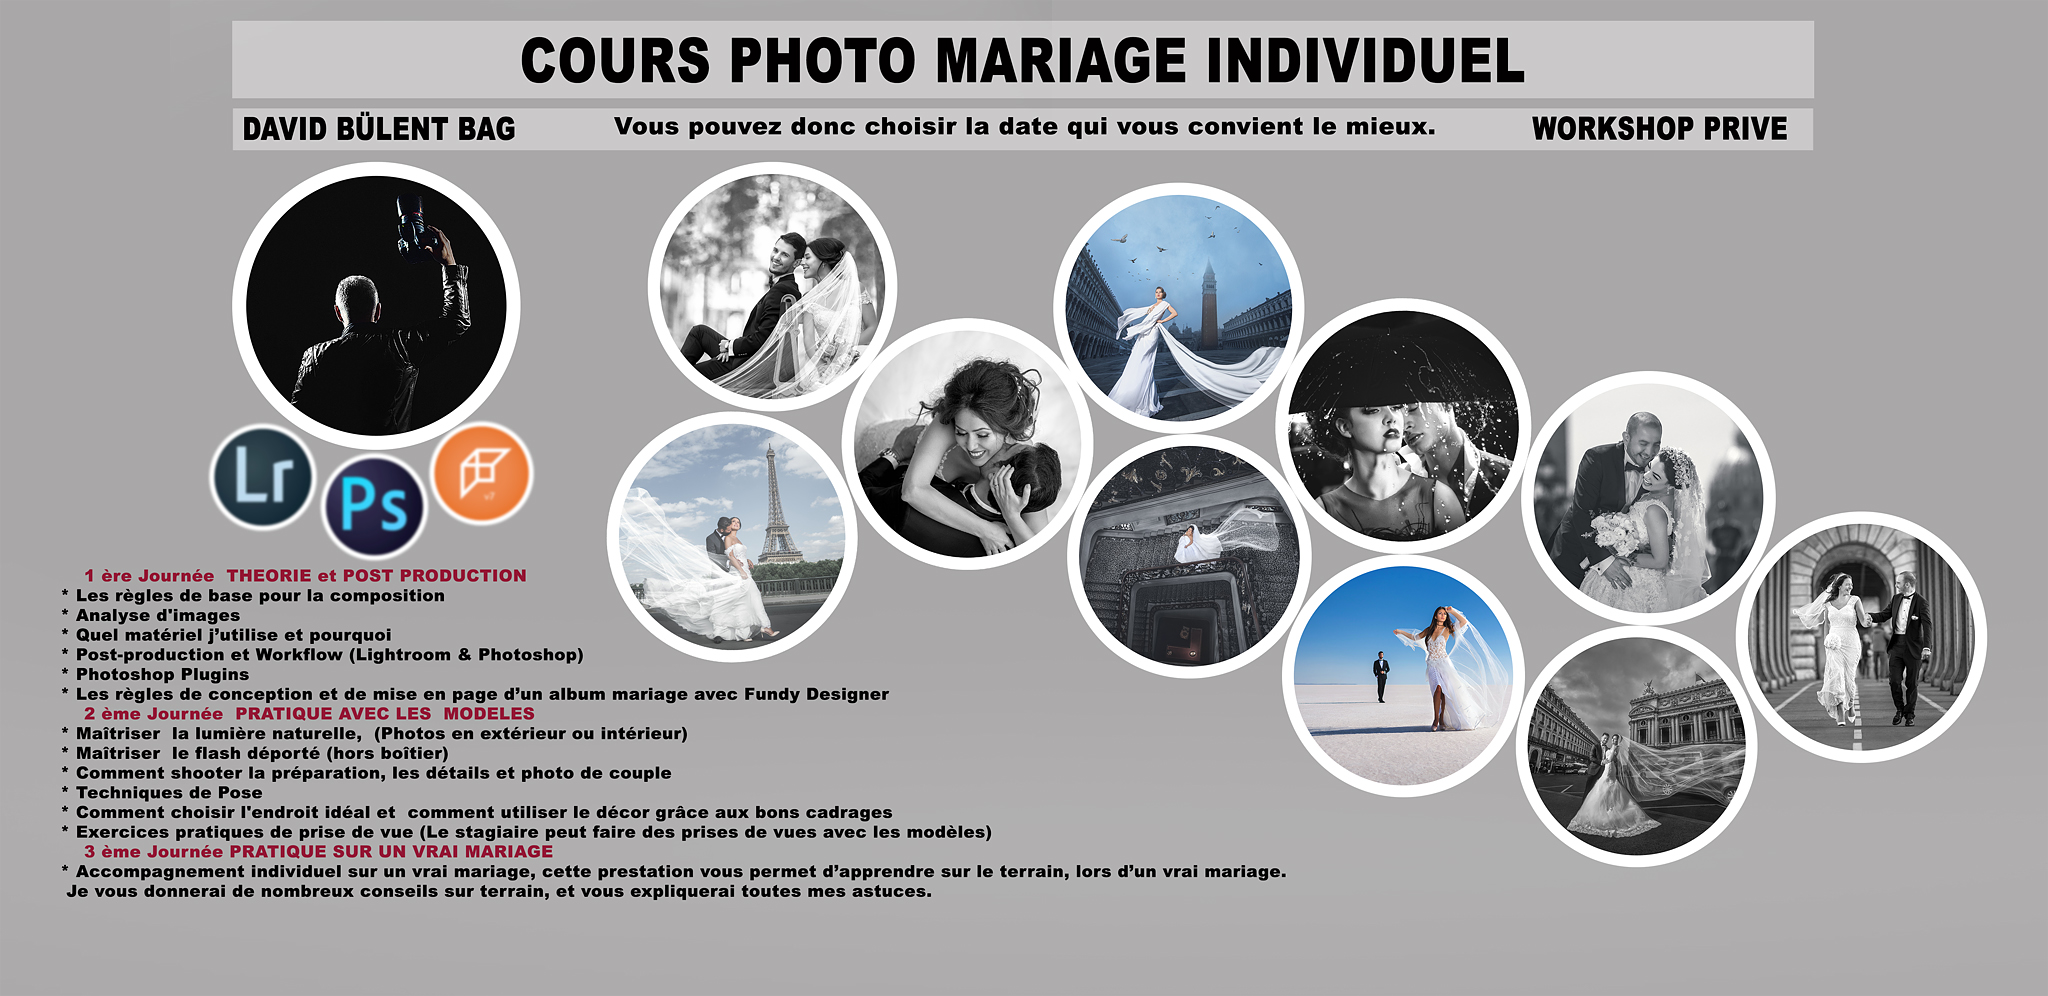 WORKSHOP PRIVE | COURS PHOTO MARIAGE INDIVIDUEL | COURS PHOTO_MARIAGE_INDIVIDUEL.jpg